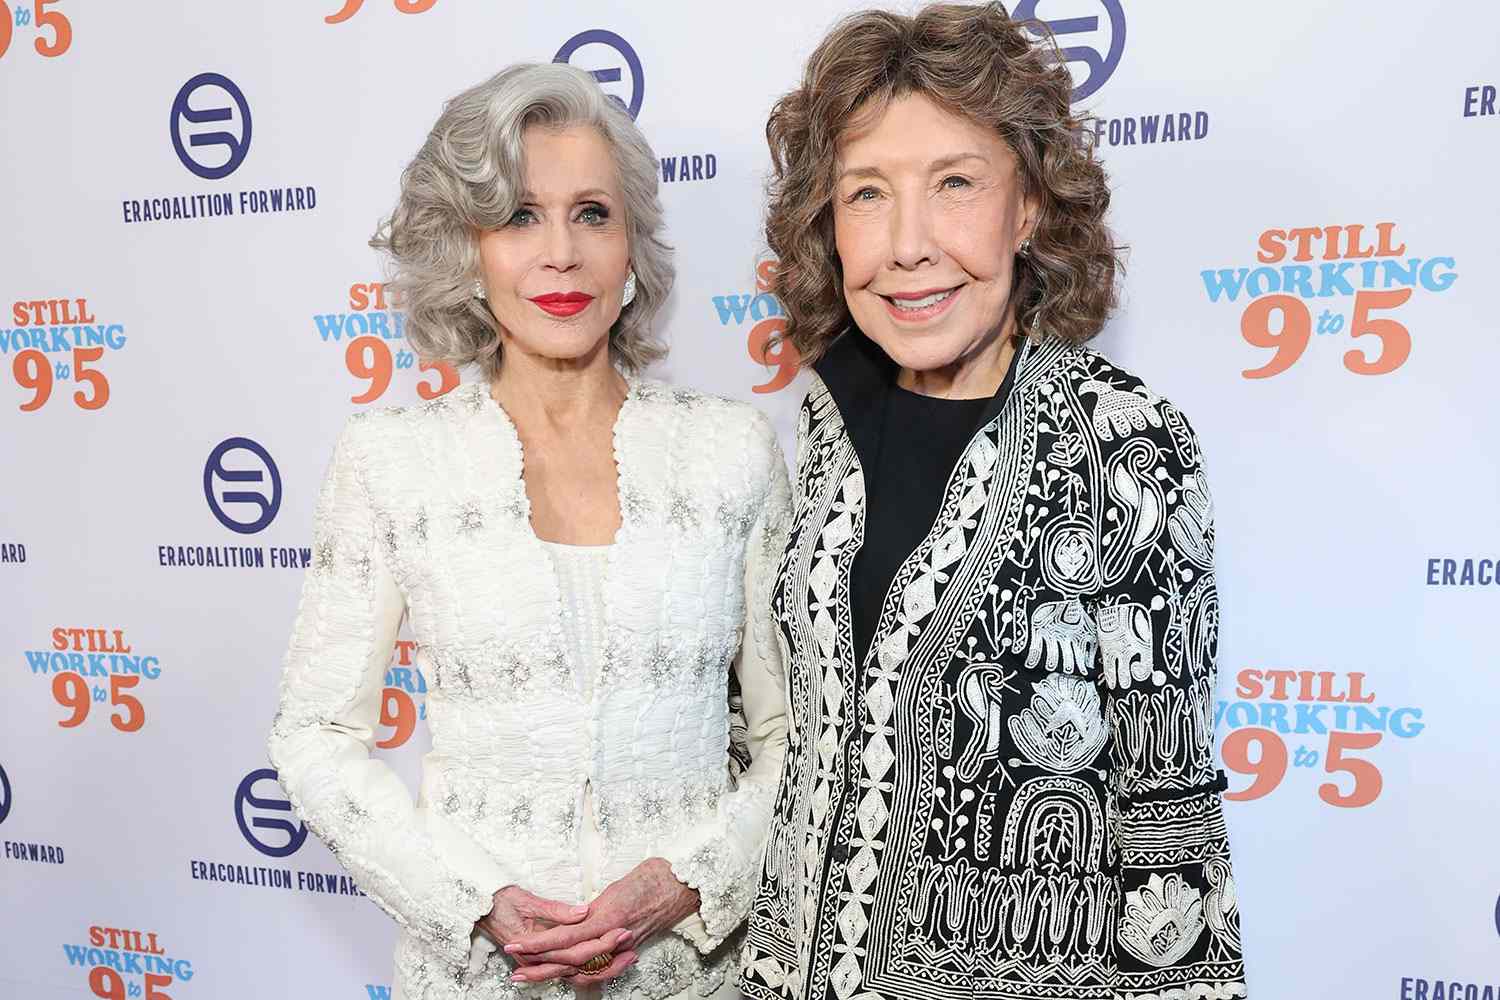 Lily Tomlin and Jane Fonda Reunite for “Still Working 9 to 5” Documentary Premiere 44 Years After Movie